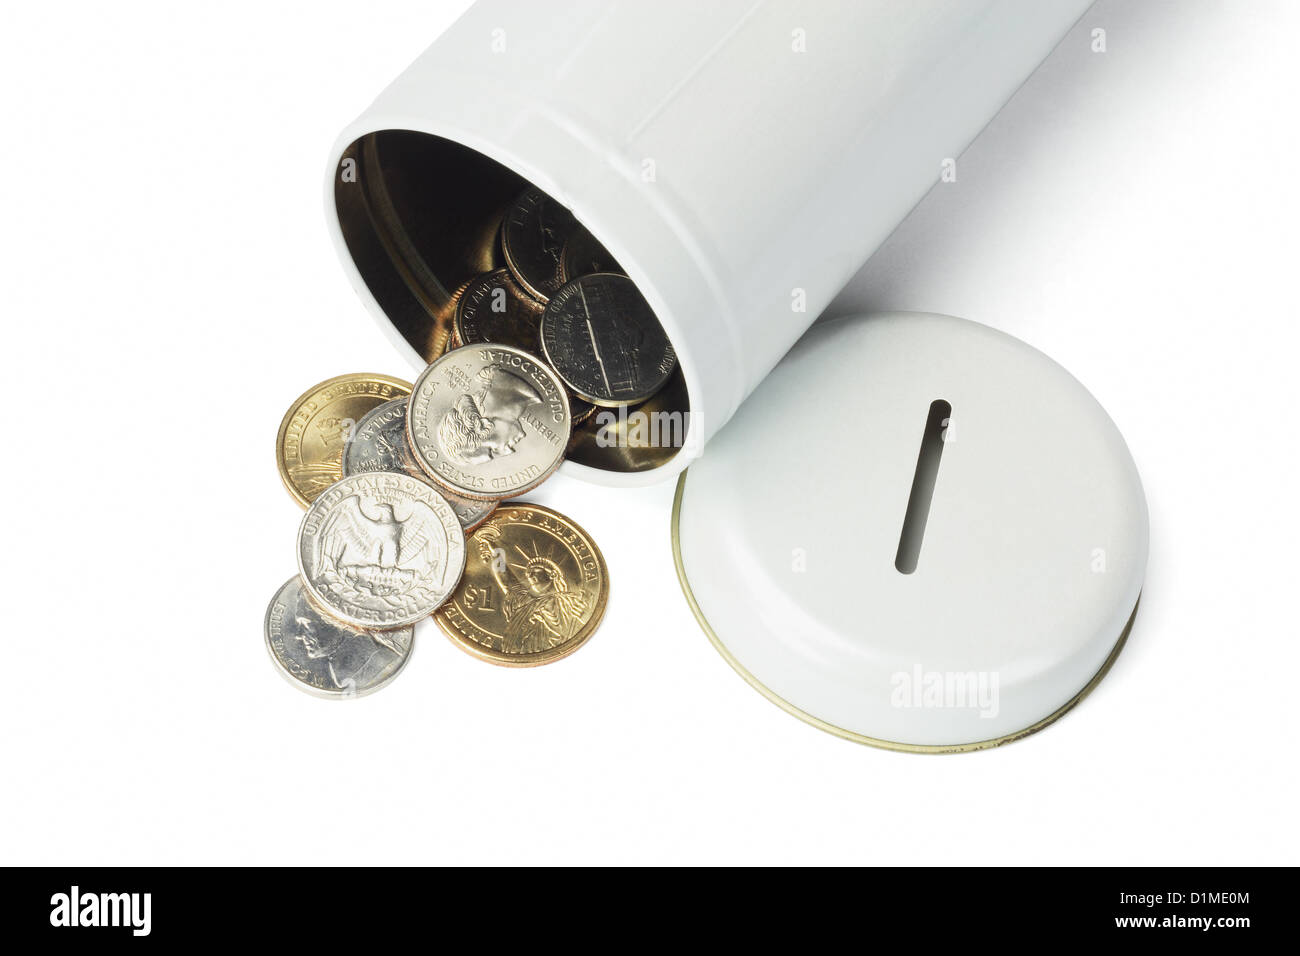 Coins Spilled Out From Open Tin Can on White Background Stock Photo